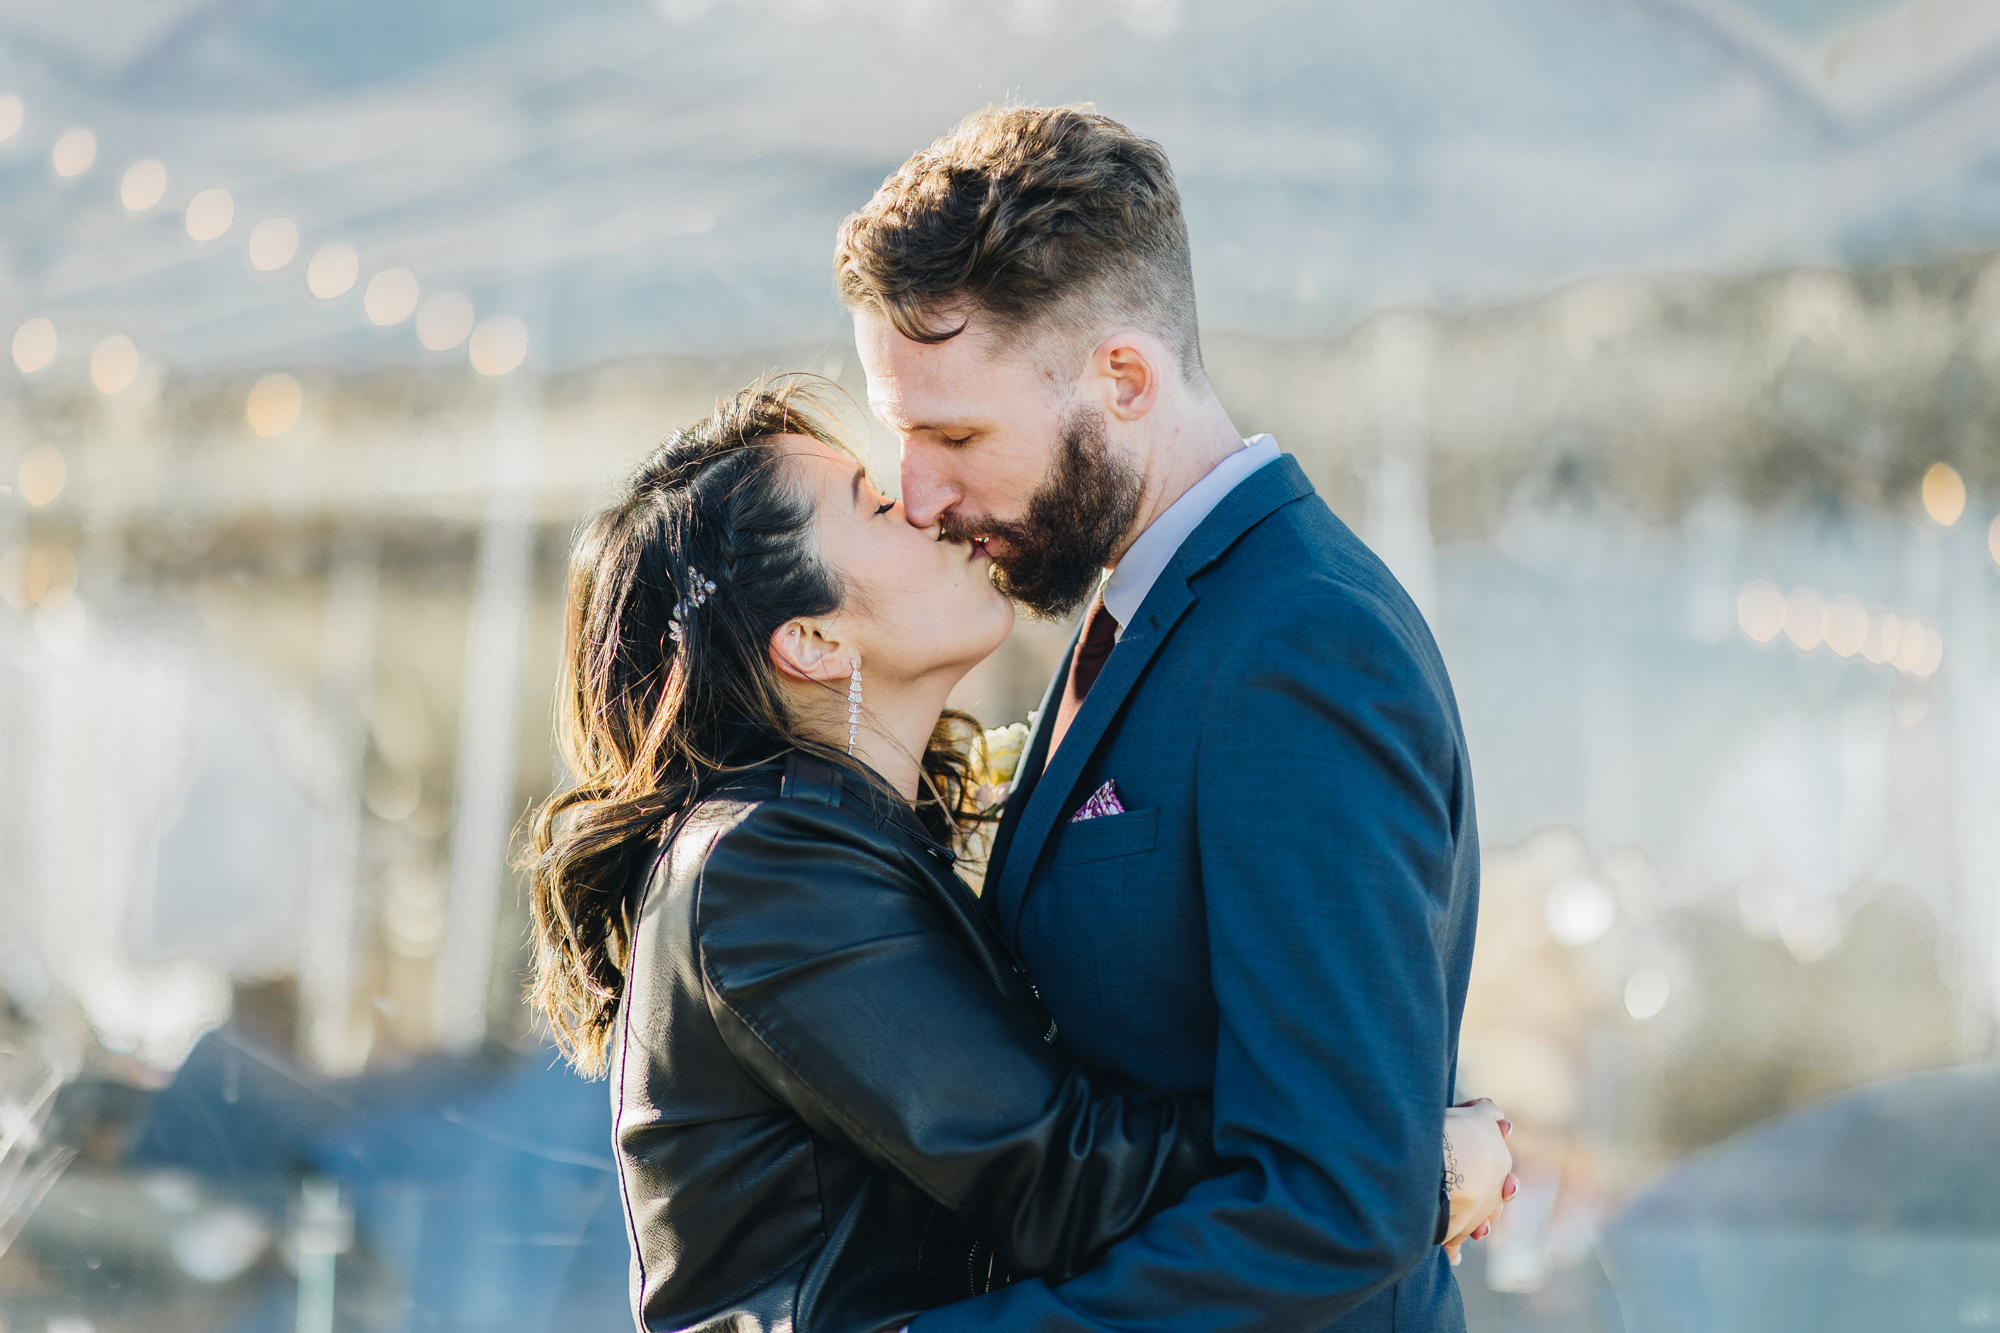 Fun and Candid Fall DUMBO Elopement with NYC views and foliage